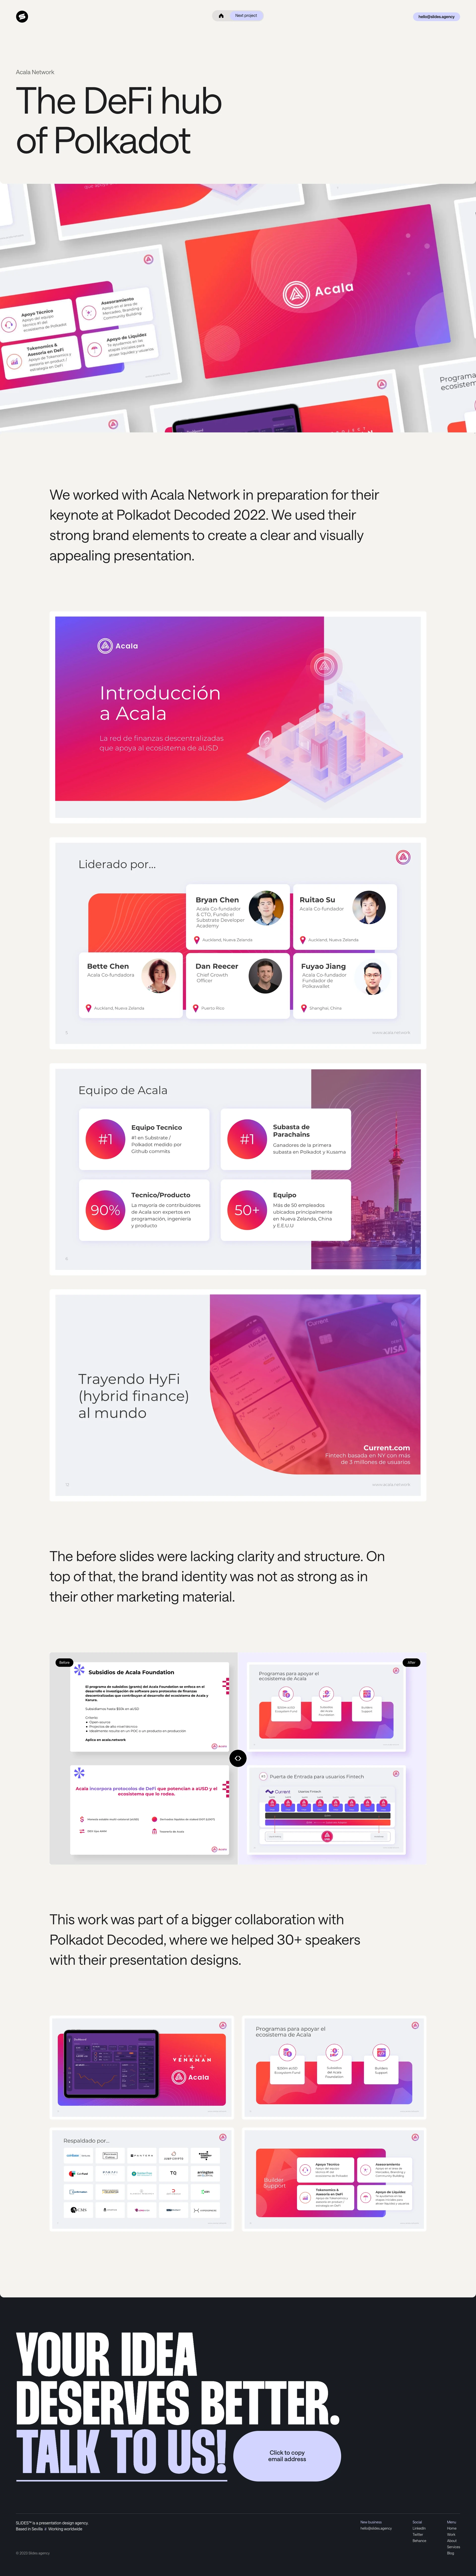 SLIDES Landing Page Example: As a presentation design agency, we use storytelling and design to create impactful pitch decks, sales presentations, PowerPoint templates, and more.